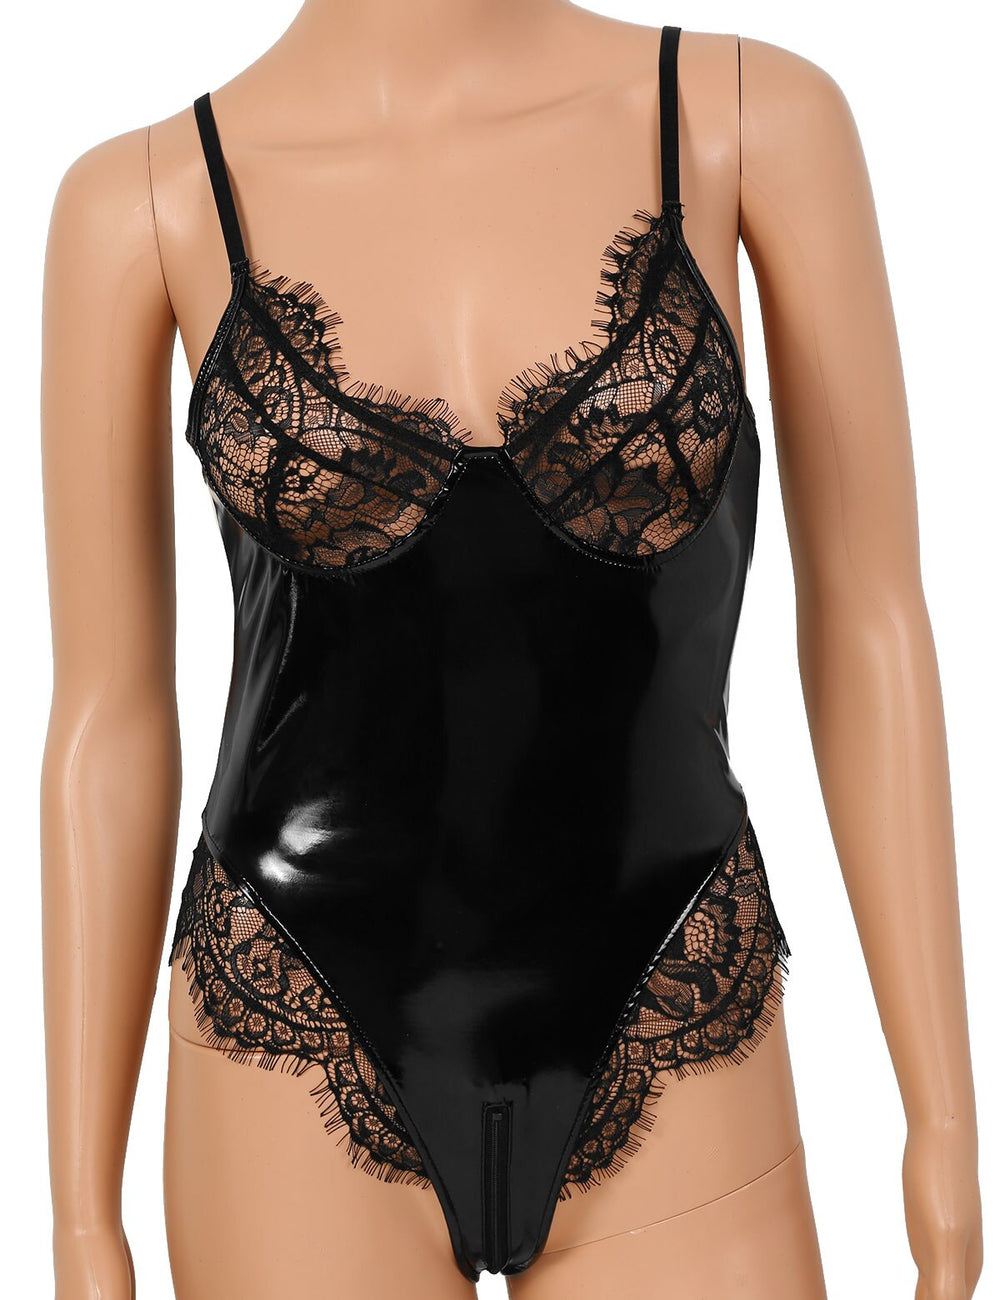 Zipped Crotchless Latex Lace Bodysuit - Own Pleasures